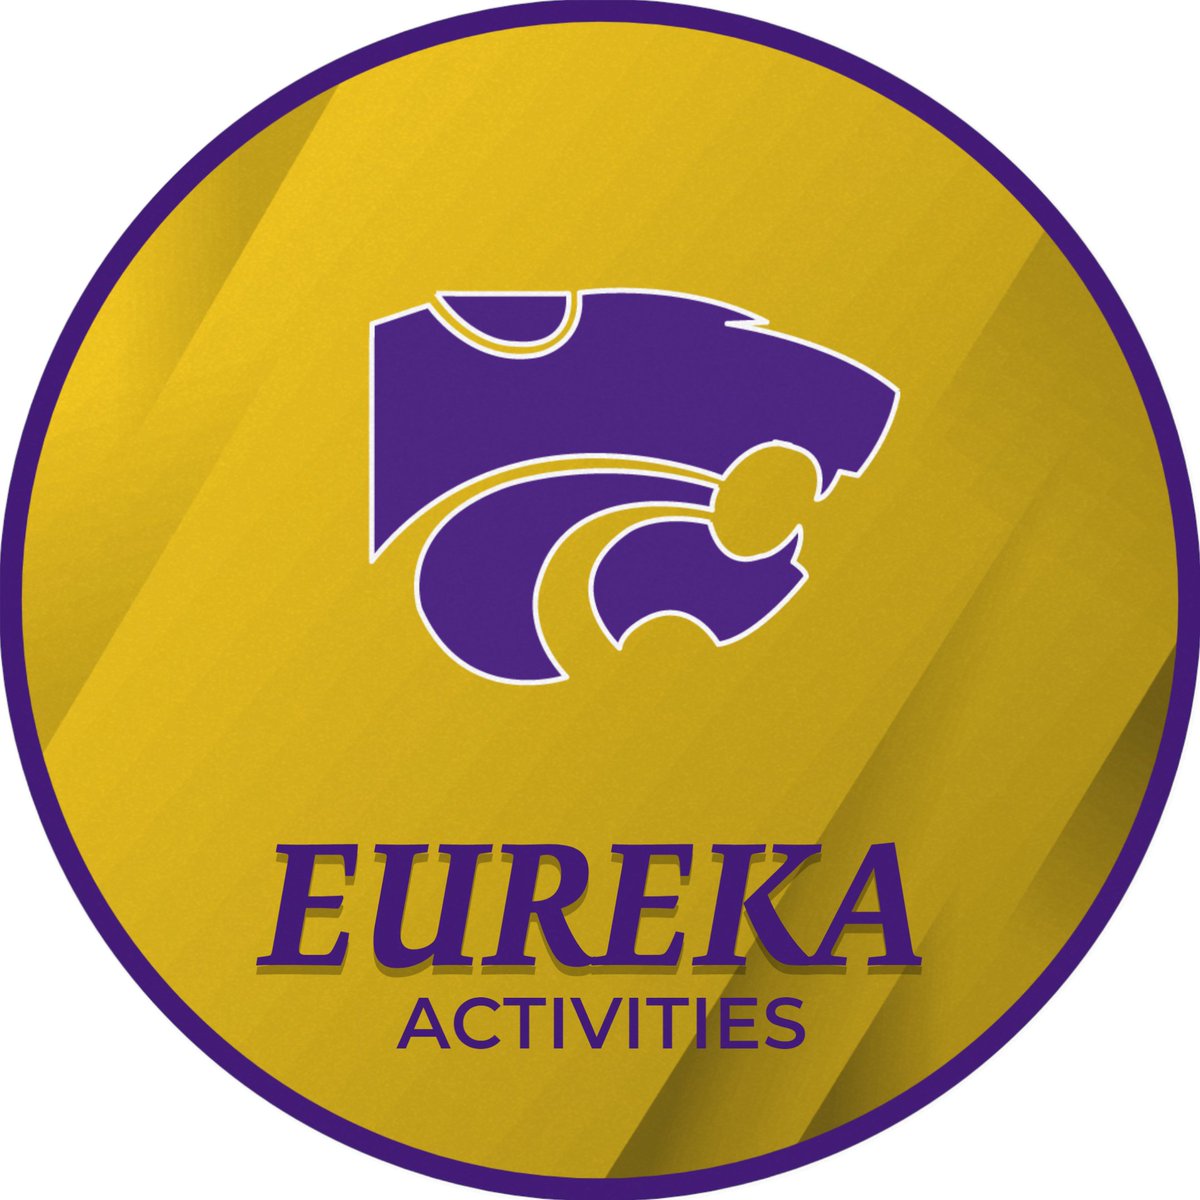 Tuesday 1/23

AWAY
JV @EurekaMOWBB vs. Union at Pacific 4:00
*JV Tournament

*New Spring Athletes, don't forget to get your paperwork completed on Privit 
eurekawildcats-mo.e-ppe.com/index.jspa

*Also if you plan on signing on Feb. 7, please fill out the Google Form forms.gle/rYbKx4MQdrJC3Y…